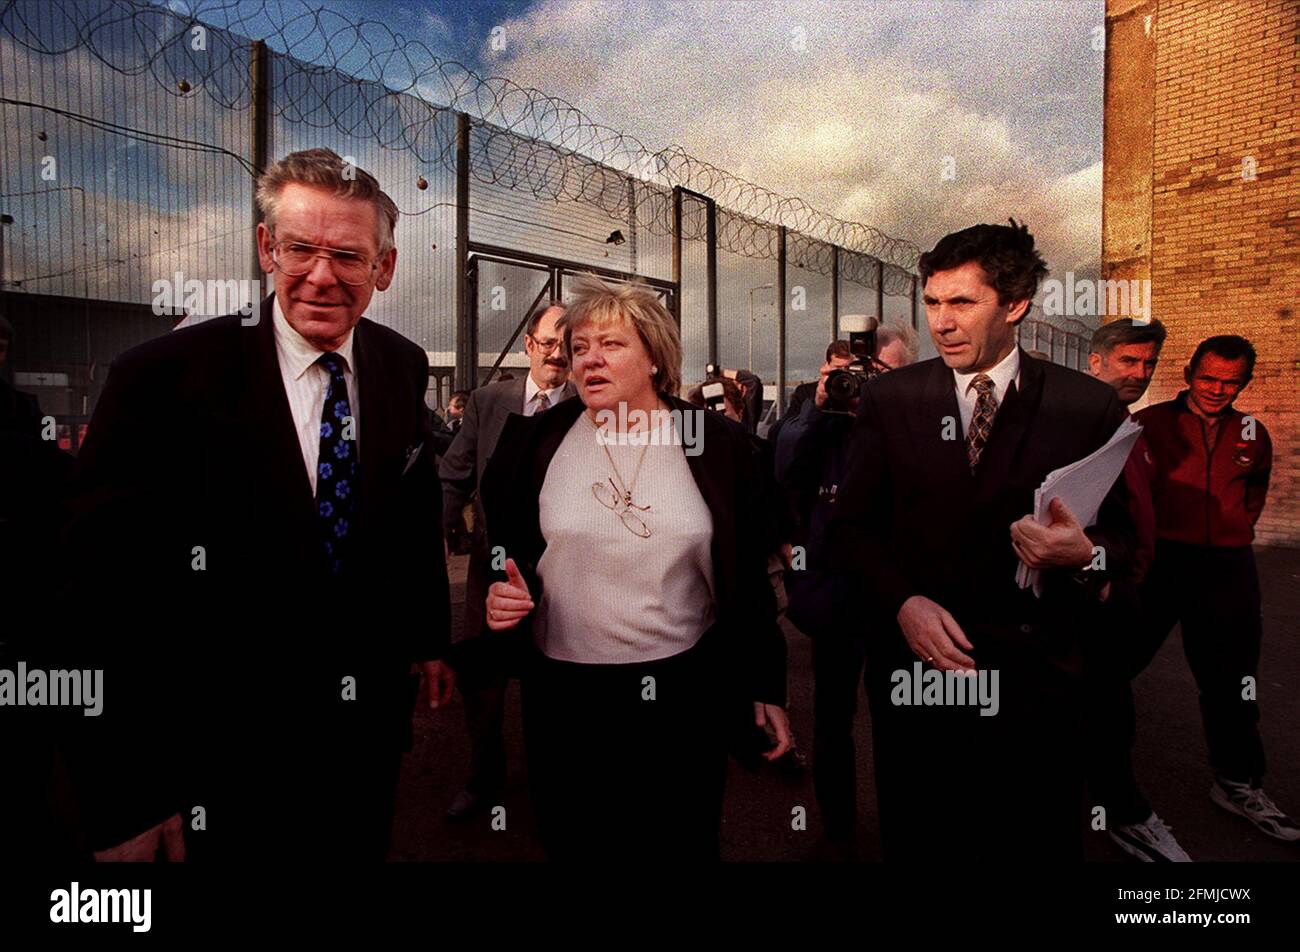 Northern Ireland Secretary Mo Mowlam at the Maze 1998 With prison governor Martin Mogg left As she visits loyalist terrorist to convince them to stay in the peace talks Stock Photo